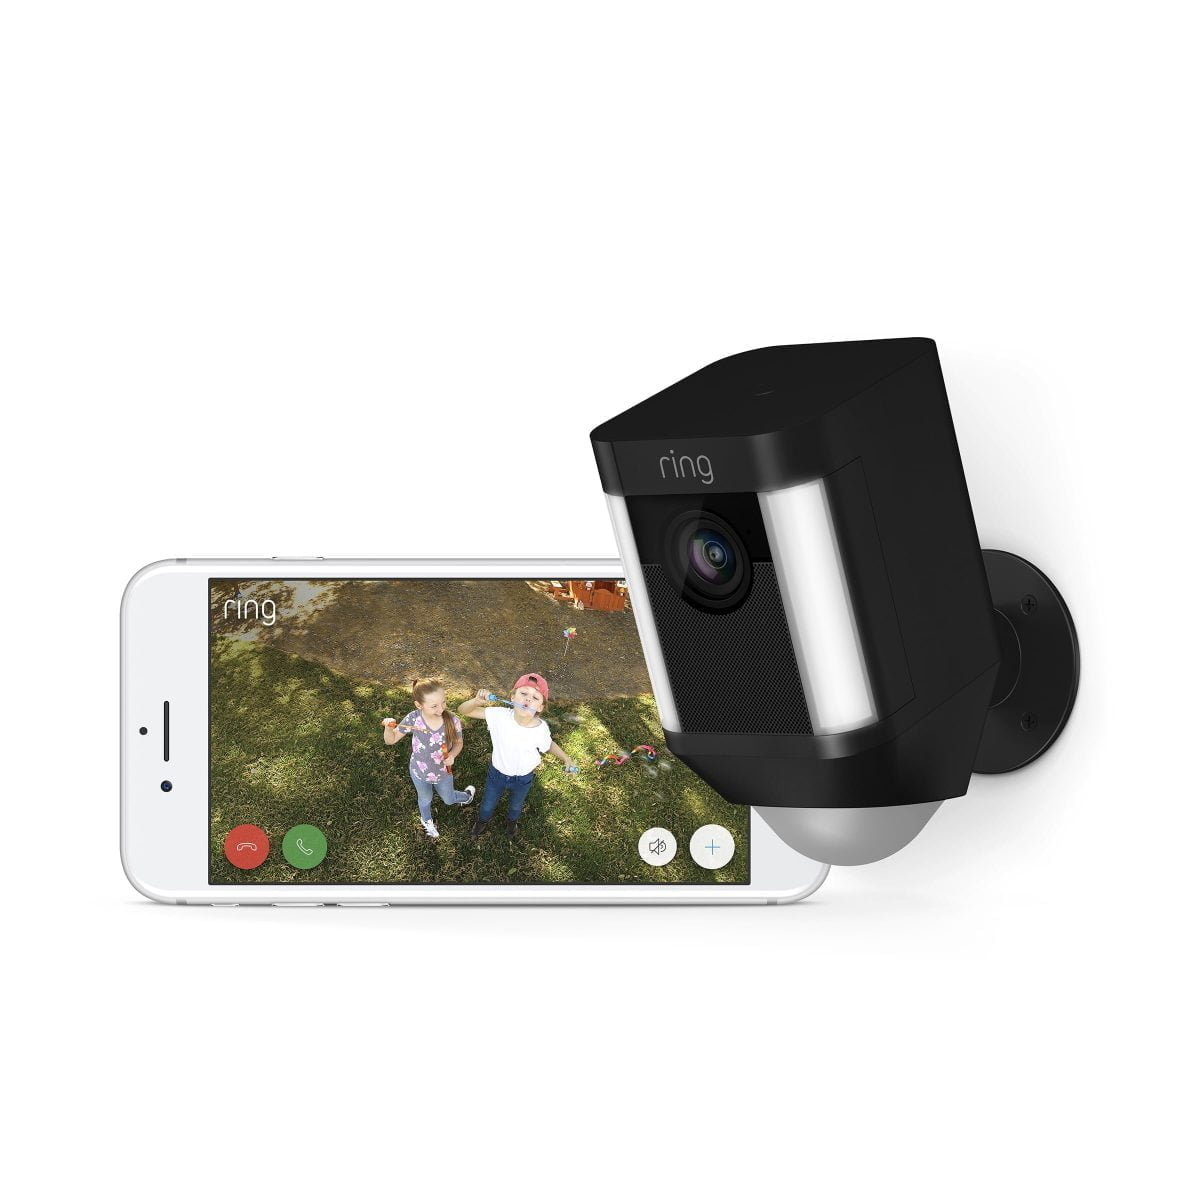 Ring Spotlight Cam Battery Black Product Lifestyle &Lt;H1&Gt;Ring Spotlight Cam Battery - Black&Lt;/H1&Gt; Https://Www.youtube.com/Watch?V=Yrbc1Pwuasg &Lt;Ul&Gt; &Lt;Li&Gt;See, Hear And Speak To People On Your Property From Your Phone, Tablet And Pc&Lt;/Li&Gt; &Lt;Li&Gt;Shine The Lights And Start Recording Video As Soon As Motion Is Detected&Lt;/Li&Gt; &Lt;Li&Gt;Sound The 110-Decibel Siren On Suspicious Activity. Connectivity-802.11 B G N Wi-Fi Connection At 2.4Ghz&Lt;/Li&Gt; &Lt;Li&Gt;Includes All The Tools You Need To Get Your Cam Setup In Just A Few Minutes&Lt;/Li&Gt; &Lt;Li&Gt;Battery-Powered Hd Camera With Two-Way Talk And Spotlights, For Security Anywhere You Need It&Lt;/Li&Gt; &Lt;/Ul&Gt; &Lt;Pre&Gt;&Lt;Strong&Gt;&Lt;Span Class=&Quot;A-List-Item&Quot;&Gt;One Year Warranty &Lt;B&Gt;We Also Provide International Wholesale And Retail Shipping To All Gcc Countries: Saudi Arabia, Qatar, Oman, Kuwait, Bahrain.&Lt;/B&Gt;&Lt;/Span&Gt;&Lt;/Strong&Gt;&Lt;/Pre&Gt; Ring Spotlight Cam Battery Ring Spotlight Cam Battery - Black